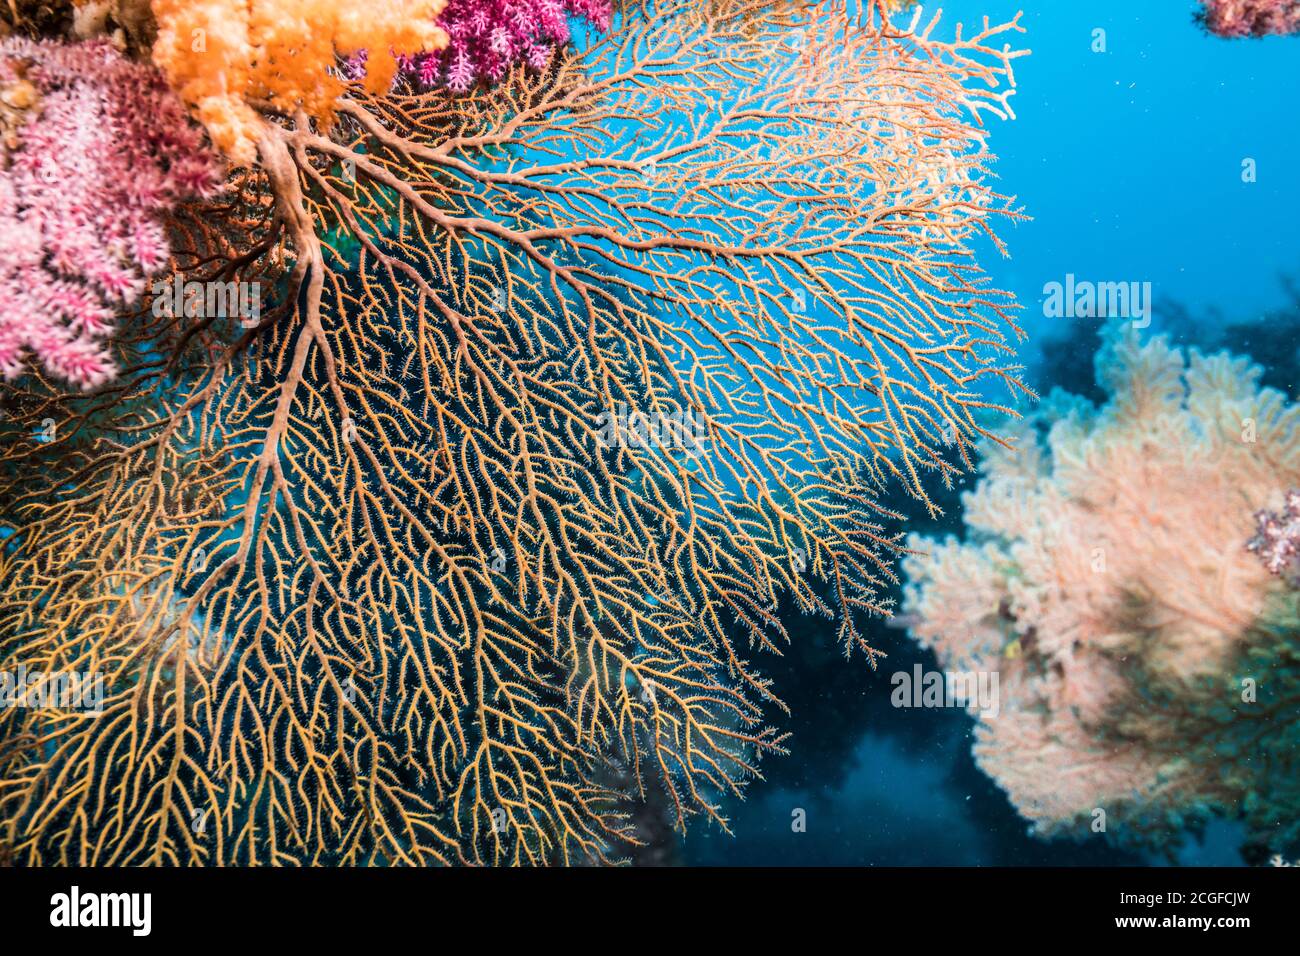 A lot of colorful soft corals cover the artificial fish reef against the background of the blue water. Stock Photo